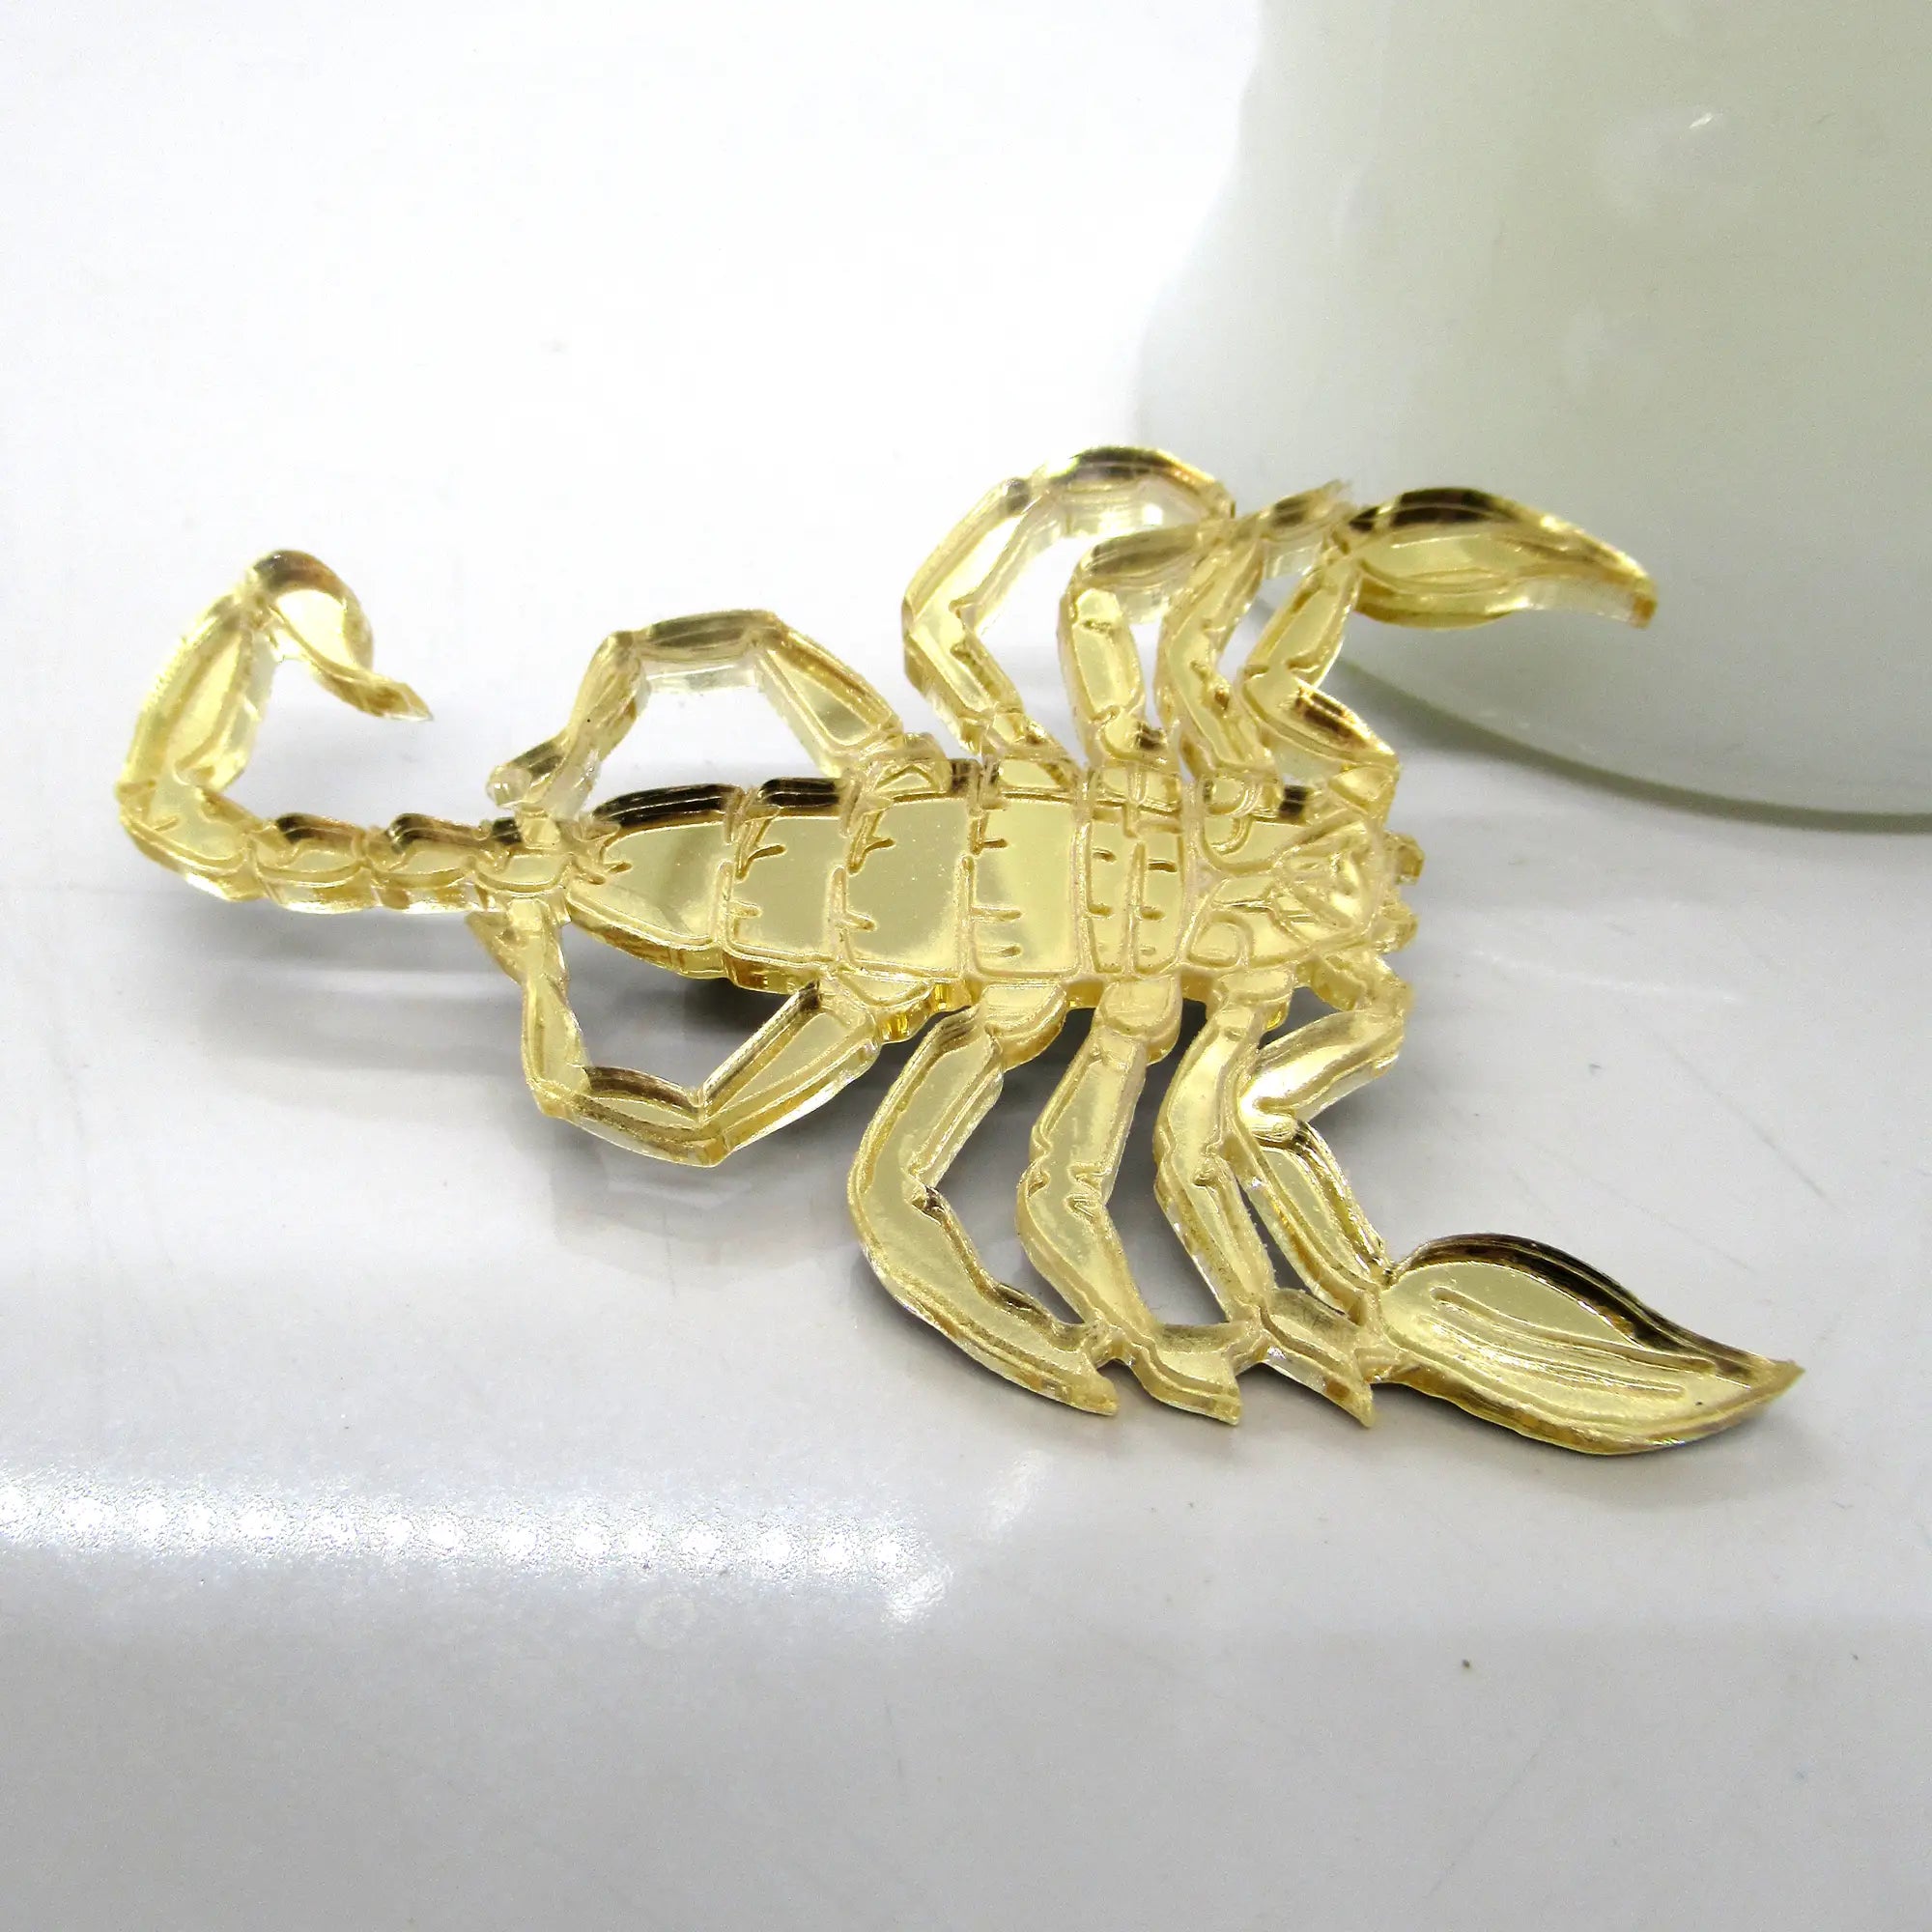 A laser cut gold mirrored acrylic brooch of a scorpion with etched detailing